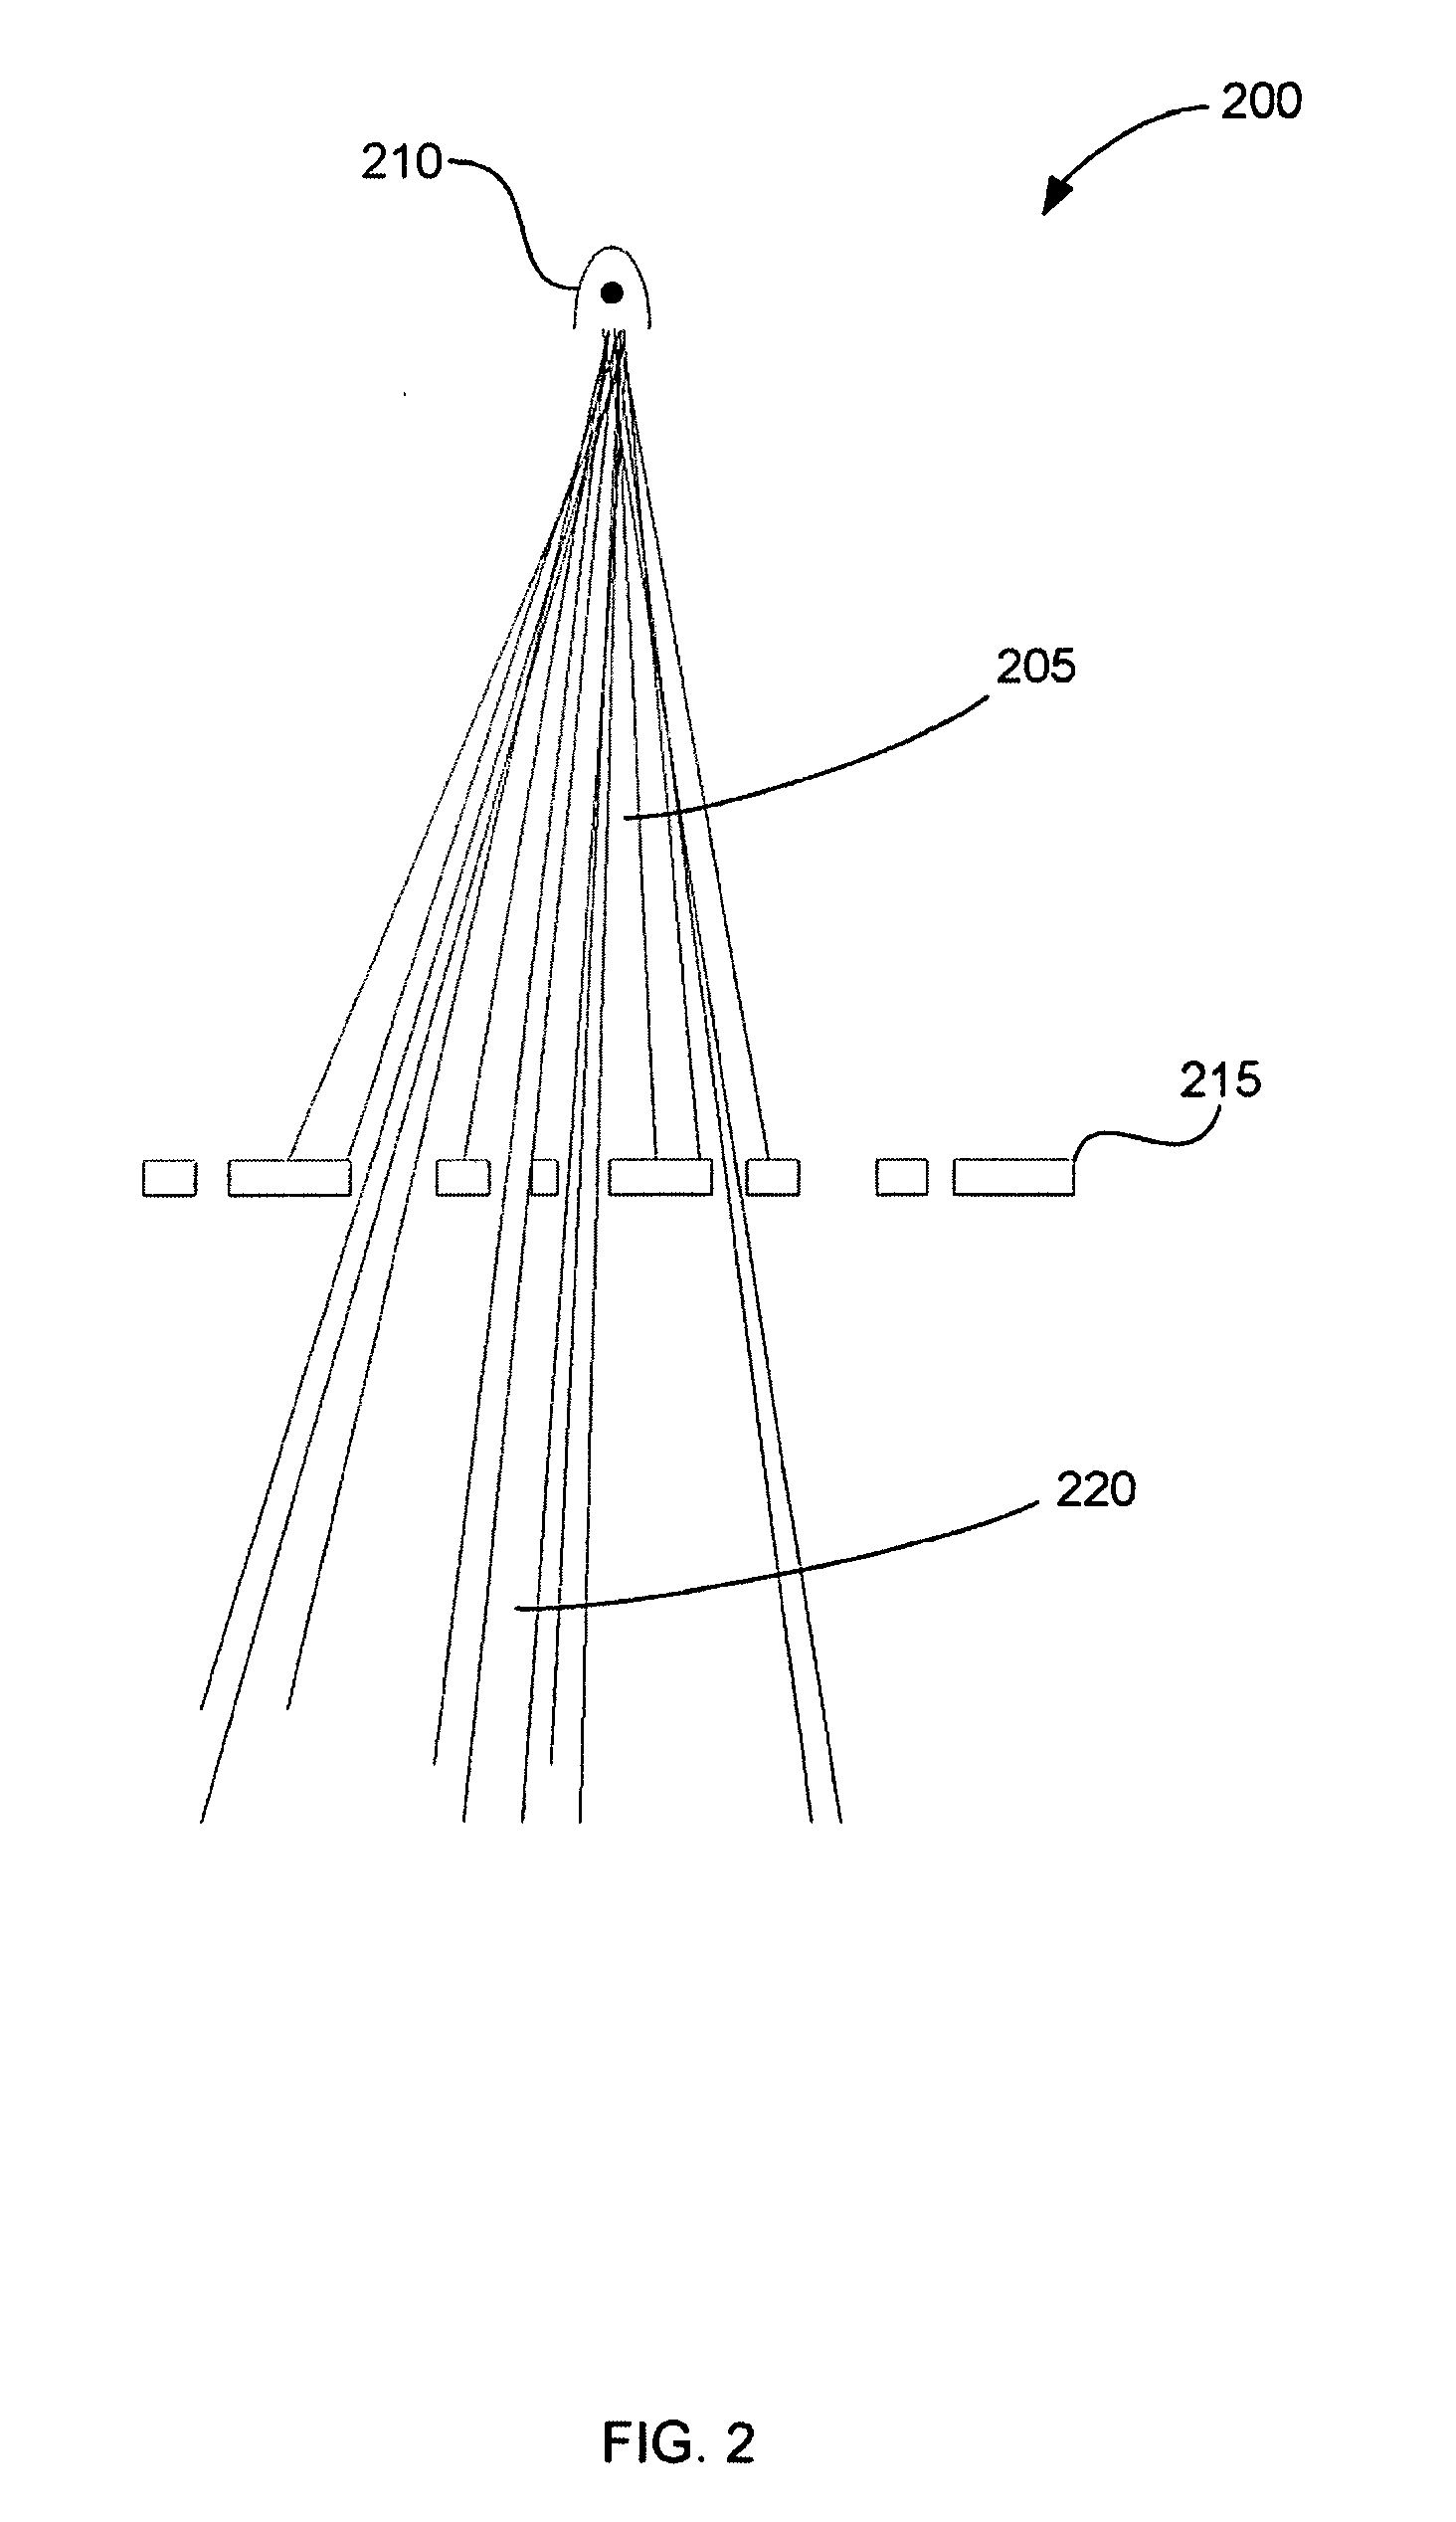 Display Using a Three-Dimensional vision System